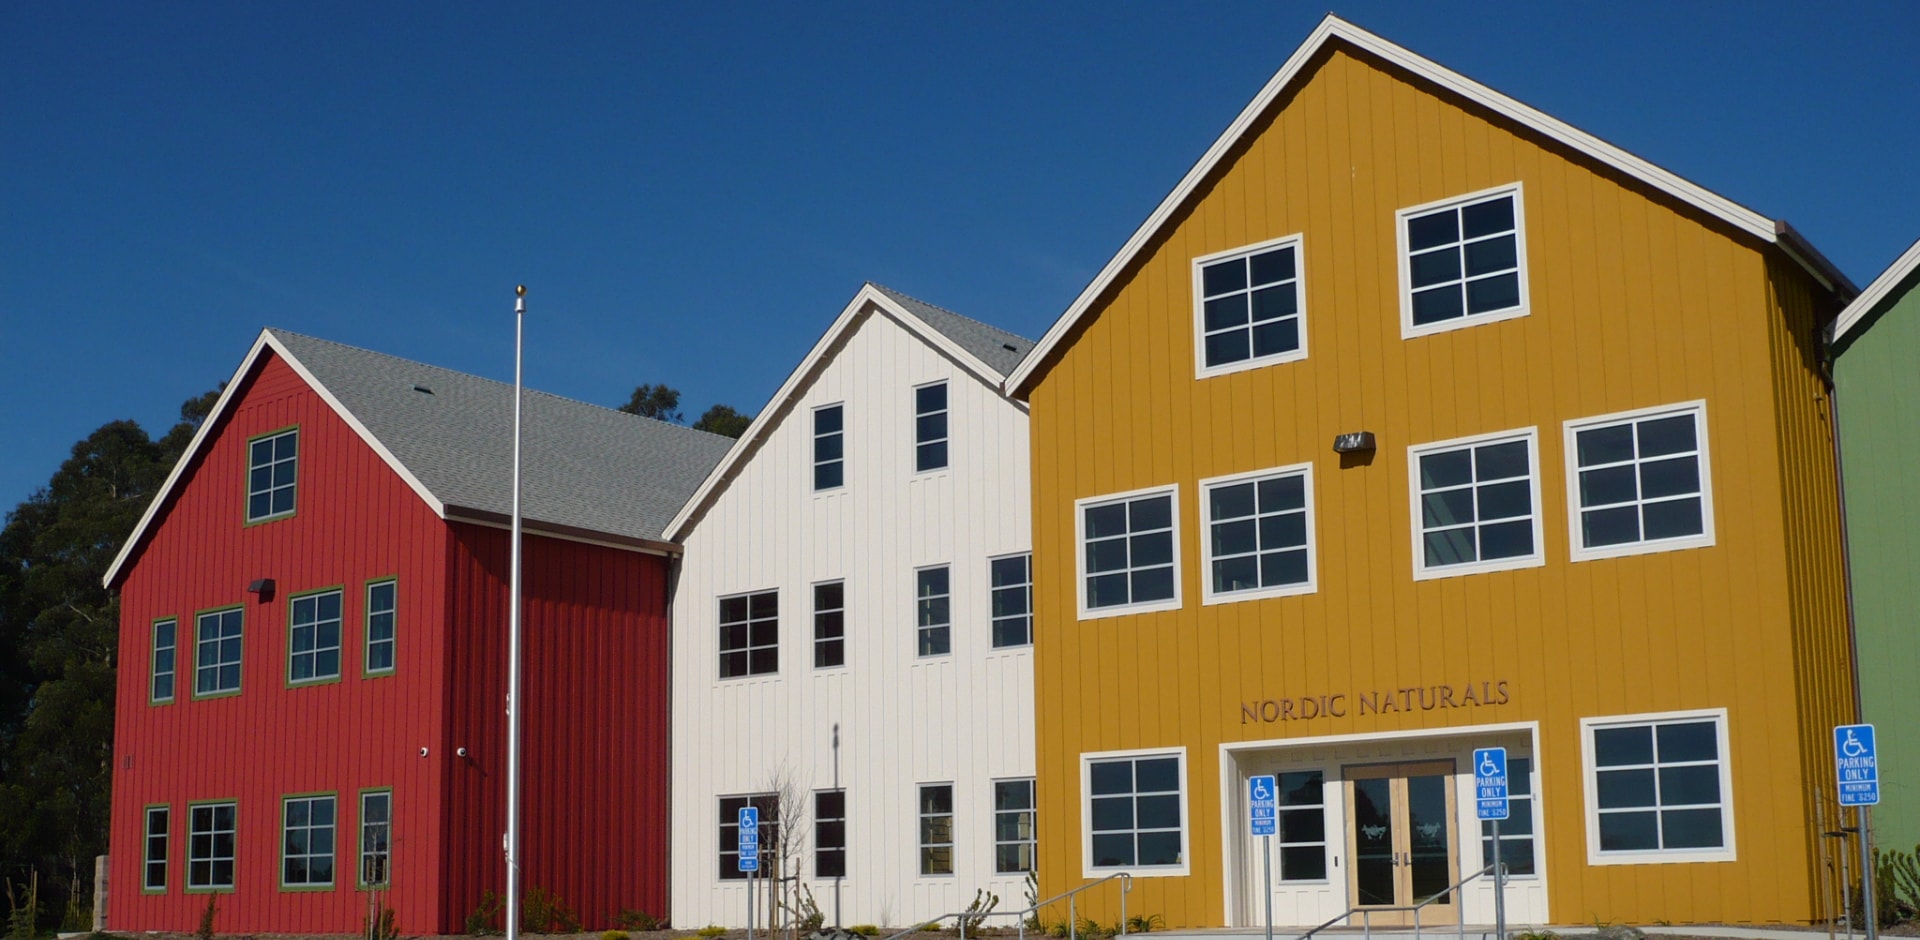 Photo Of The Nordic Naturals Buildings